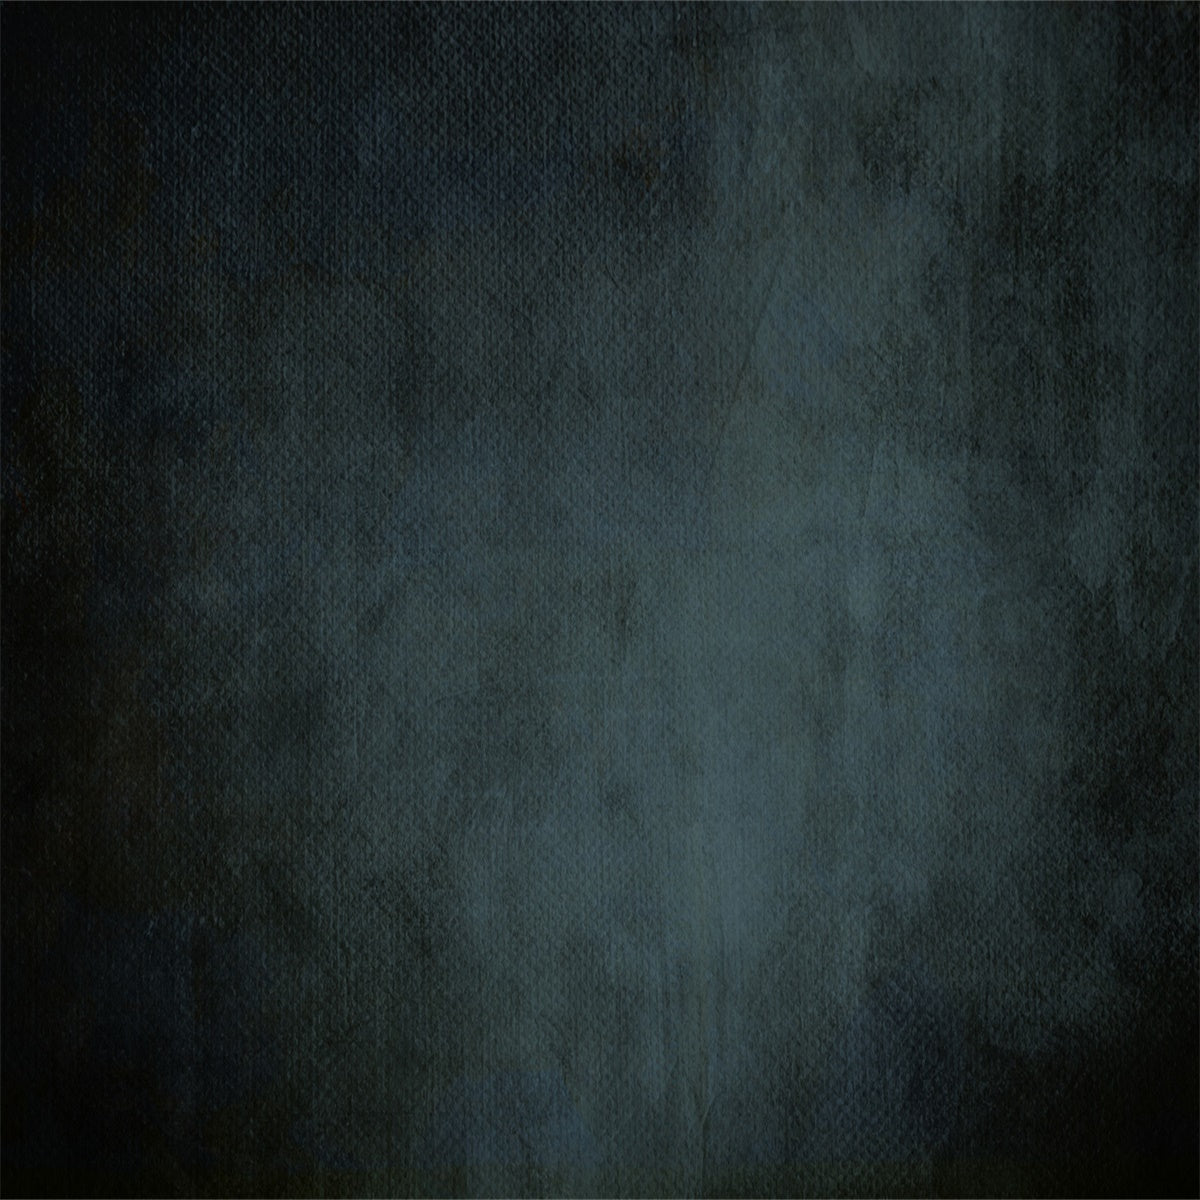 Abstract Dark Slate Gray Pattern Photography Backdrops for Picture